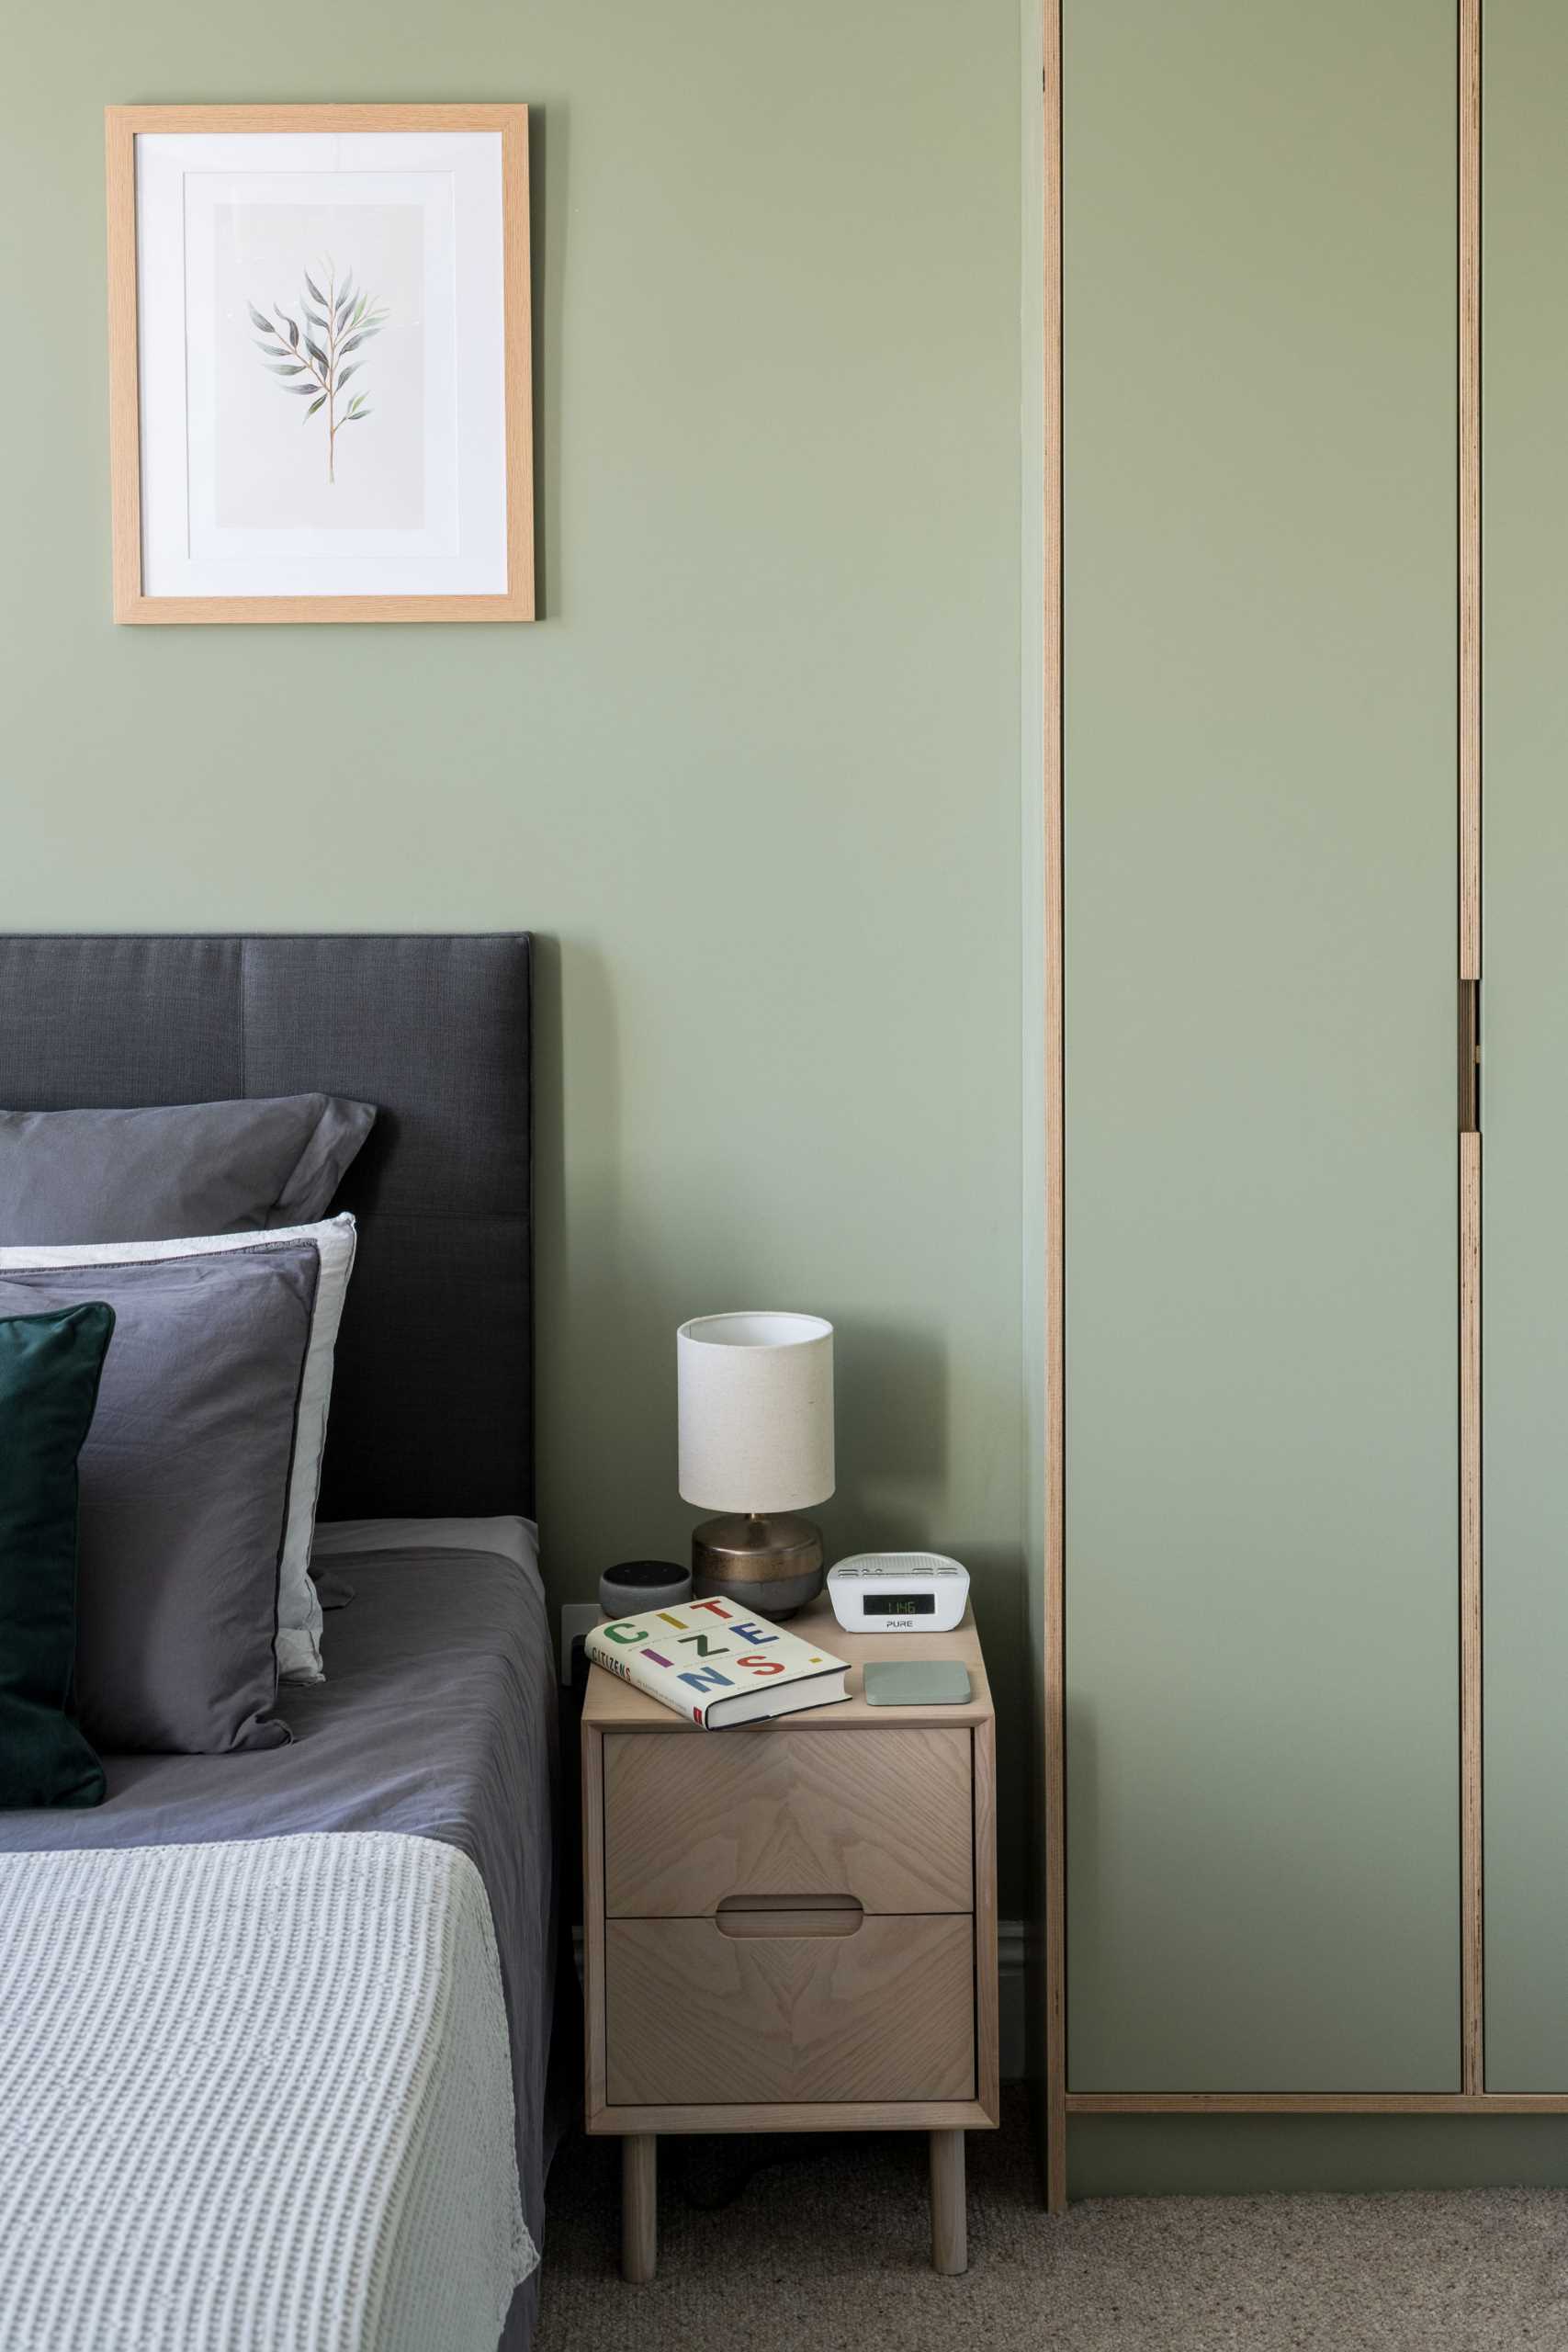 In this modern bedroom, matte green was the chosen color, and is featured on the walls as well as the closets. Wood accents provide a natural contrasting element.